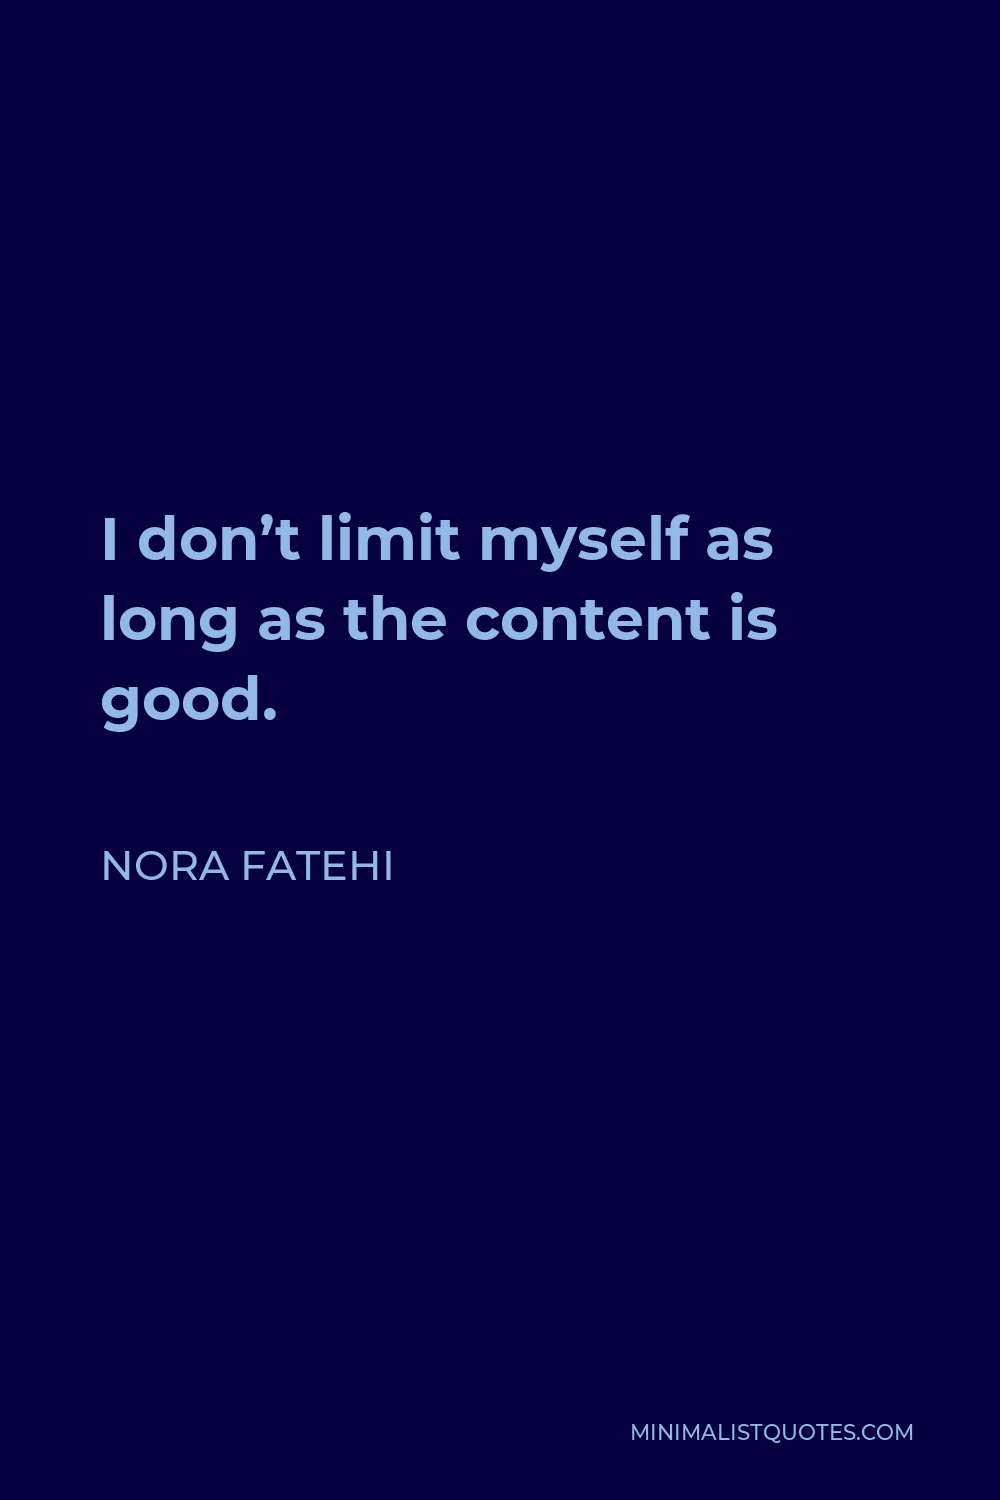 Nora Fatehi Quote - I don’t limit myself as long as the content is good.